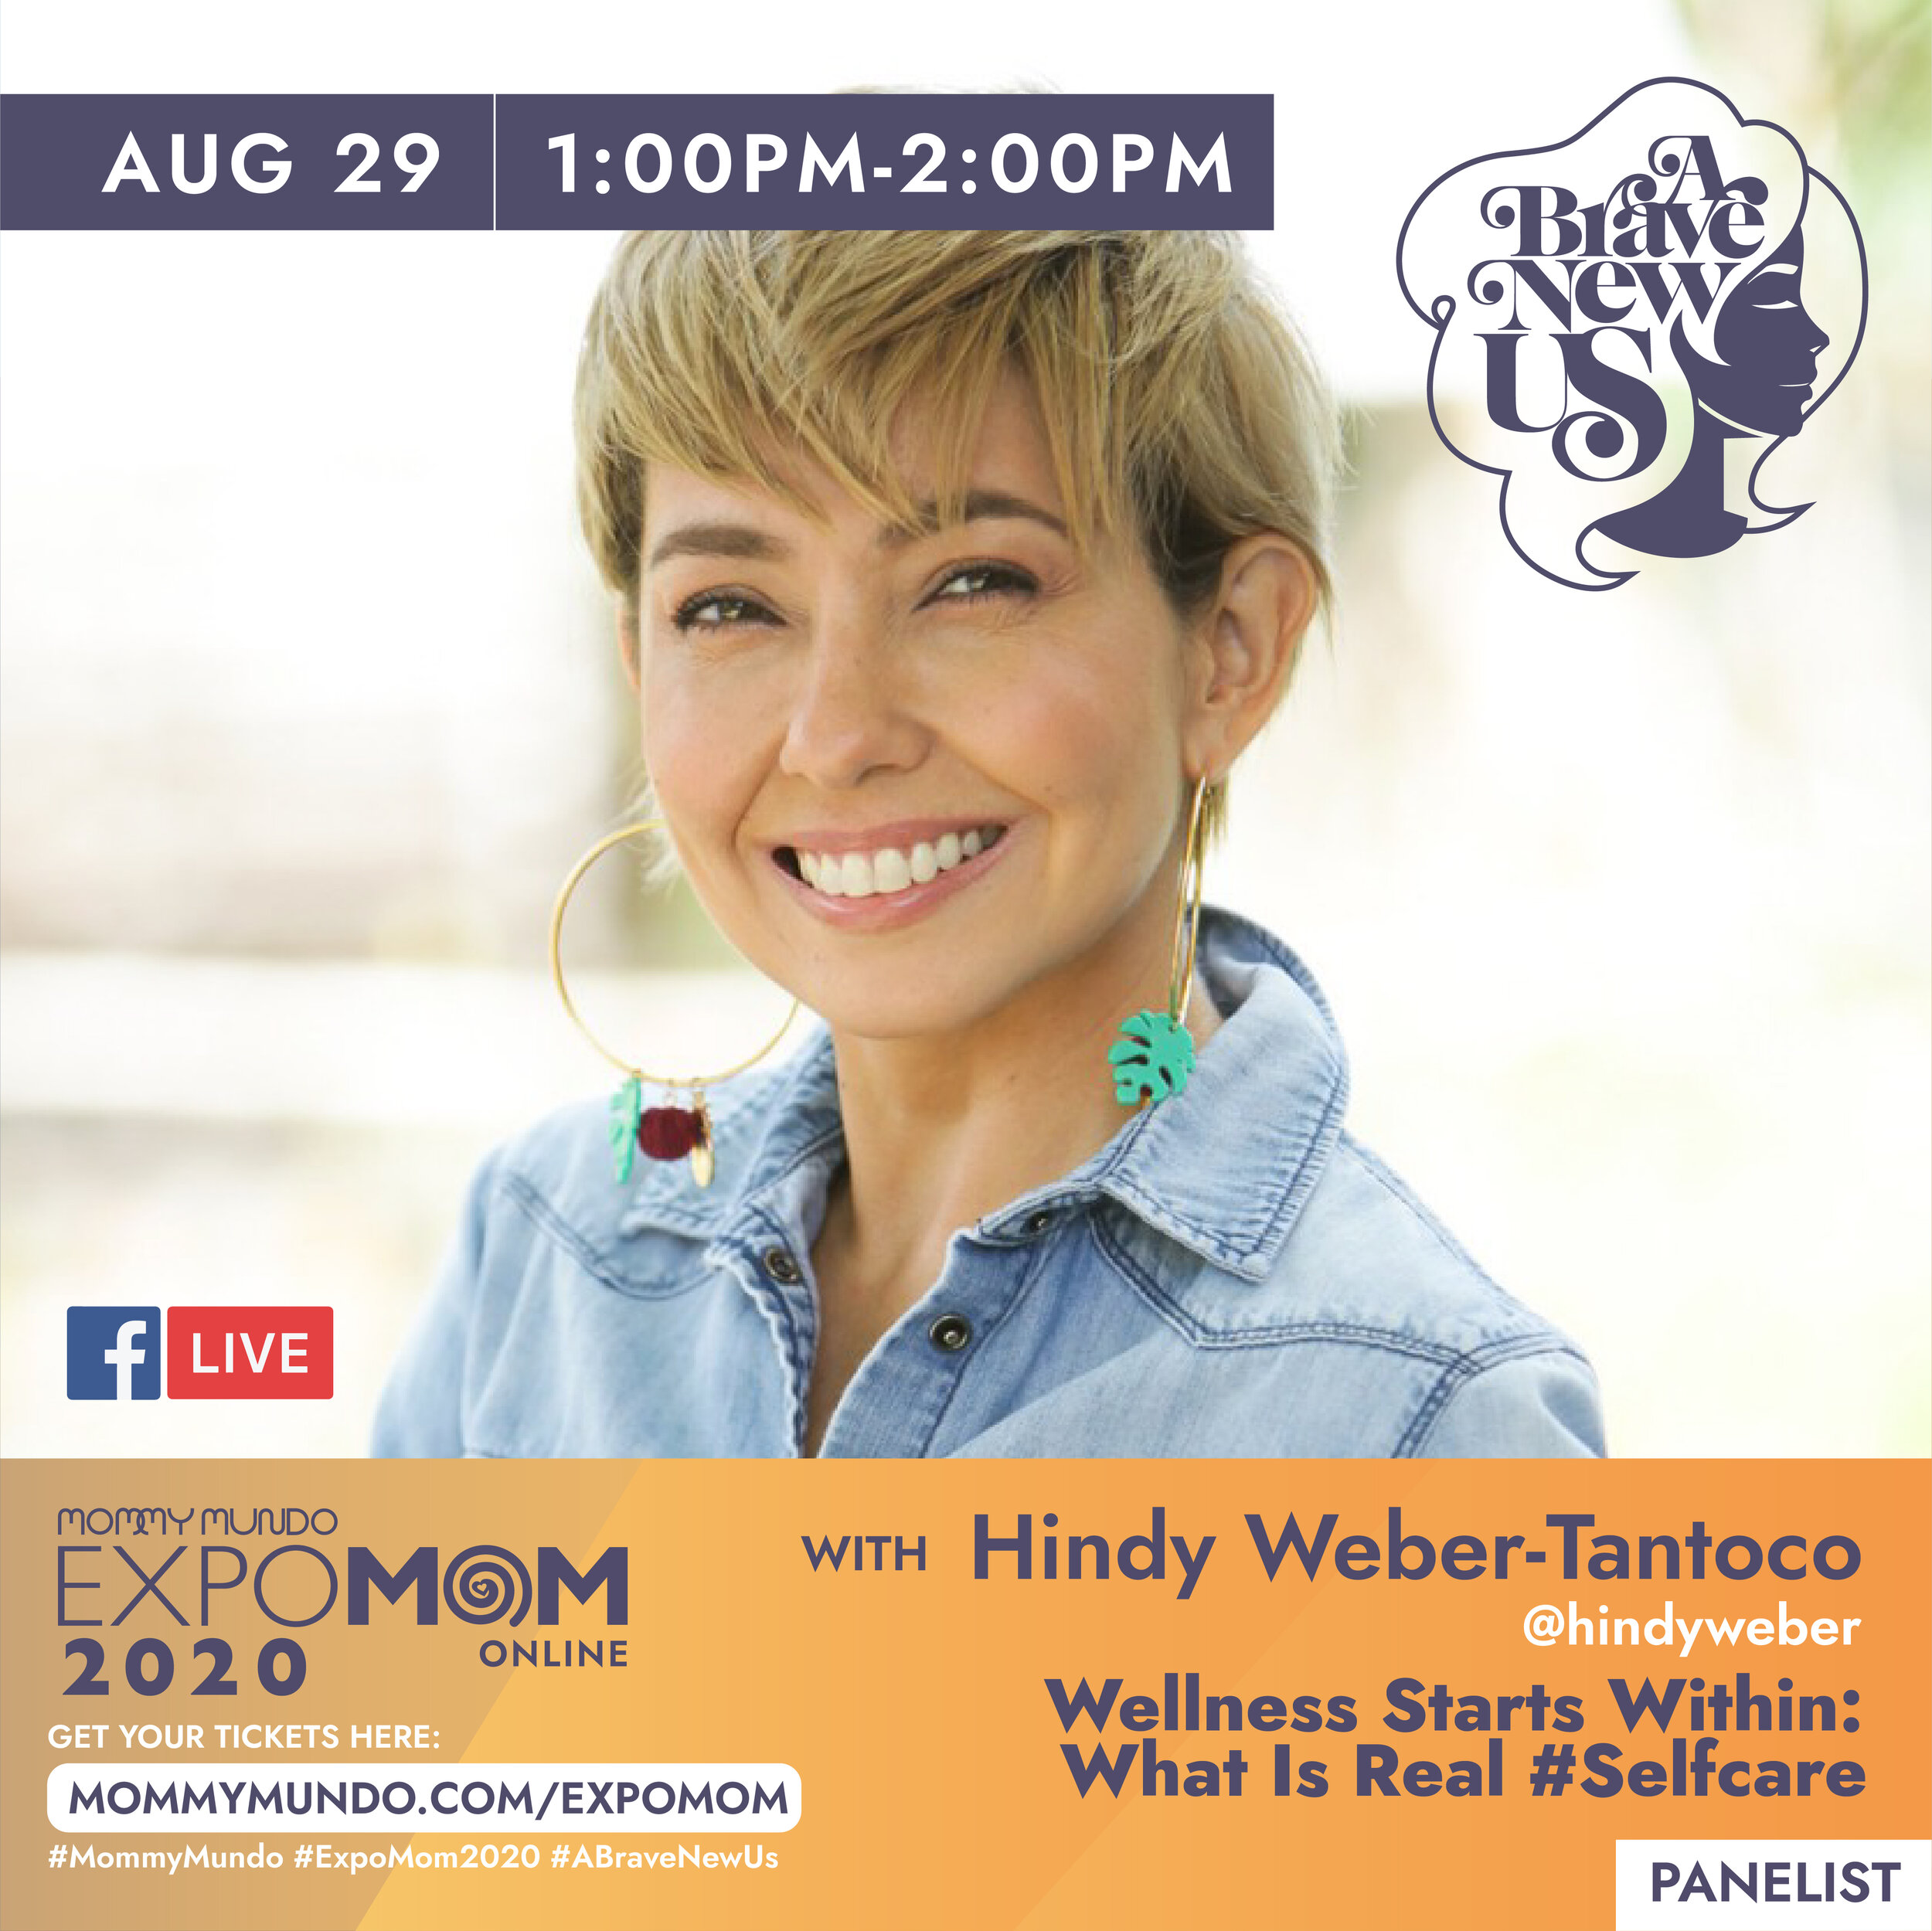  Founder of Holy Carabao Farm and the Sta. Elena Fun Farm, Hindy is well known for her beach and holistic lifestyle, including Waldorf education for her children. 